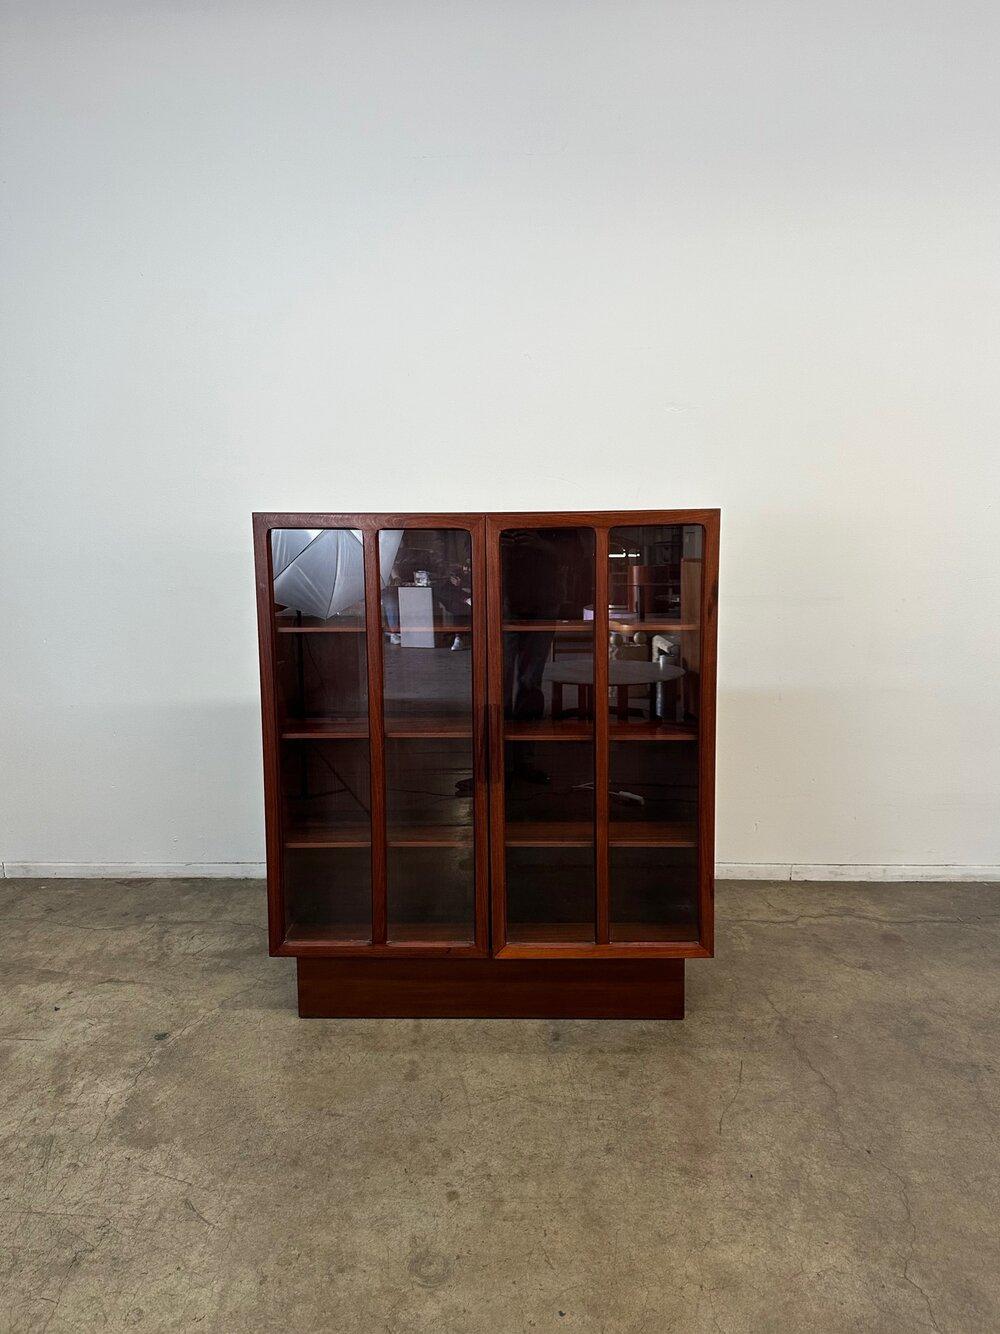 Dimensions: W46 D13 H52

Fully restored rosewood bookcase with glass doors. Item is structurally sound, fully functional and presents well. This item does have heavy glass and wooden doors and item itself should be secured to the wall for added